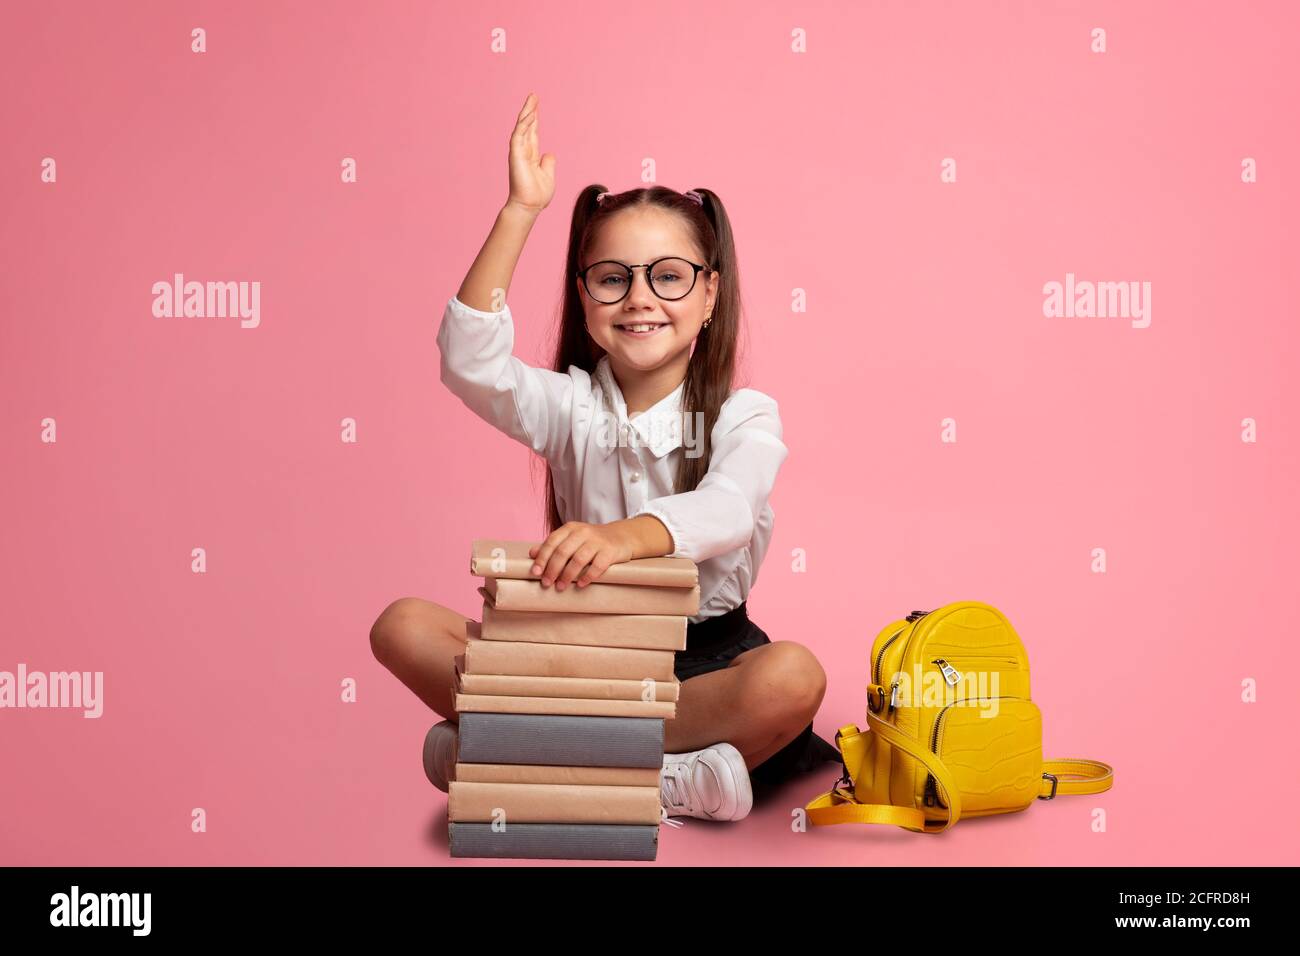 Clever pupil. Smiling girl in glasses with stack of books and backpack knows answer and raises hand up Stock Photo